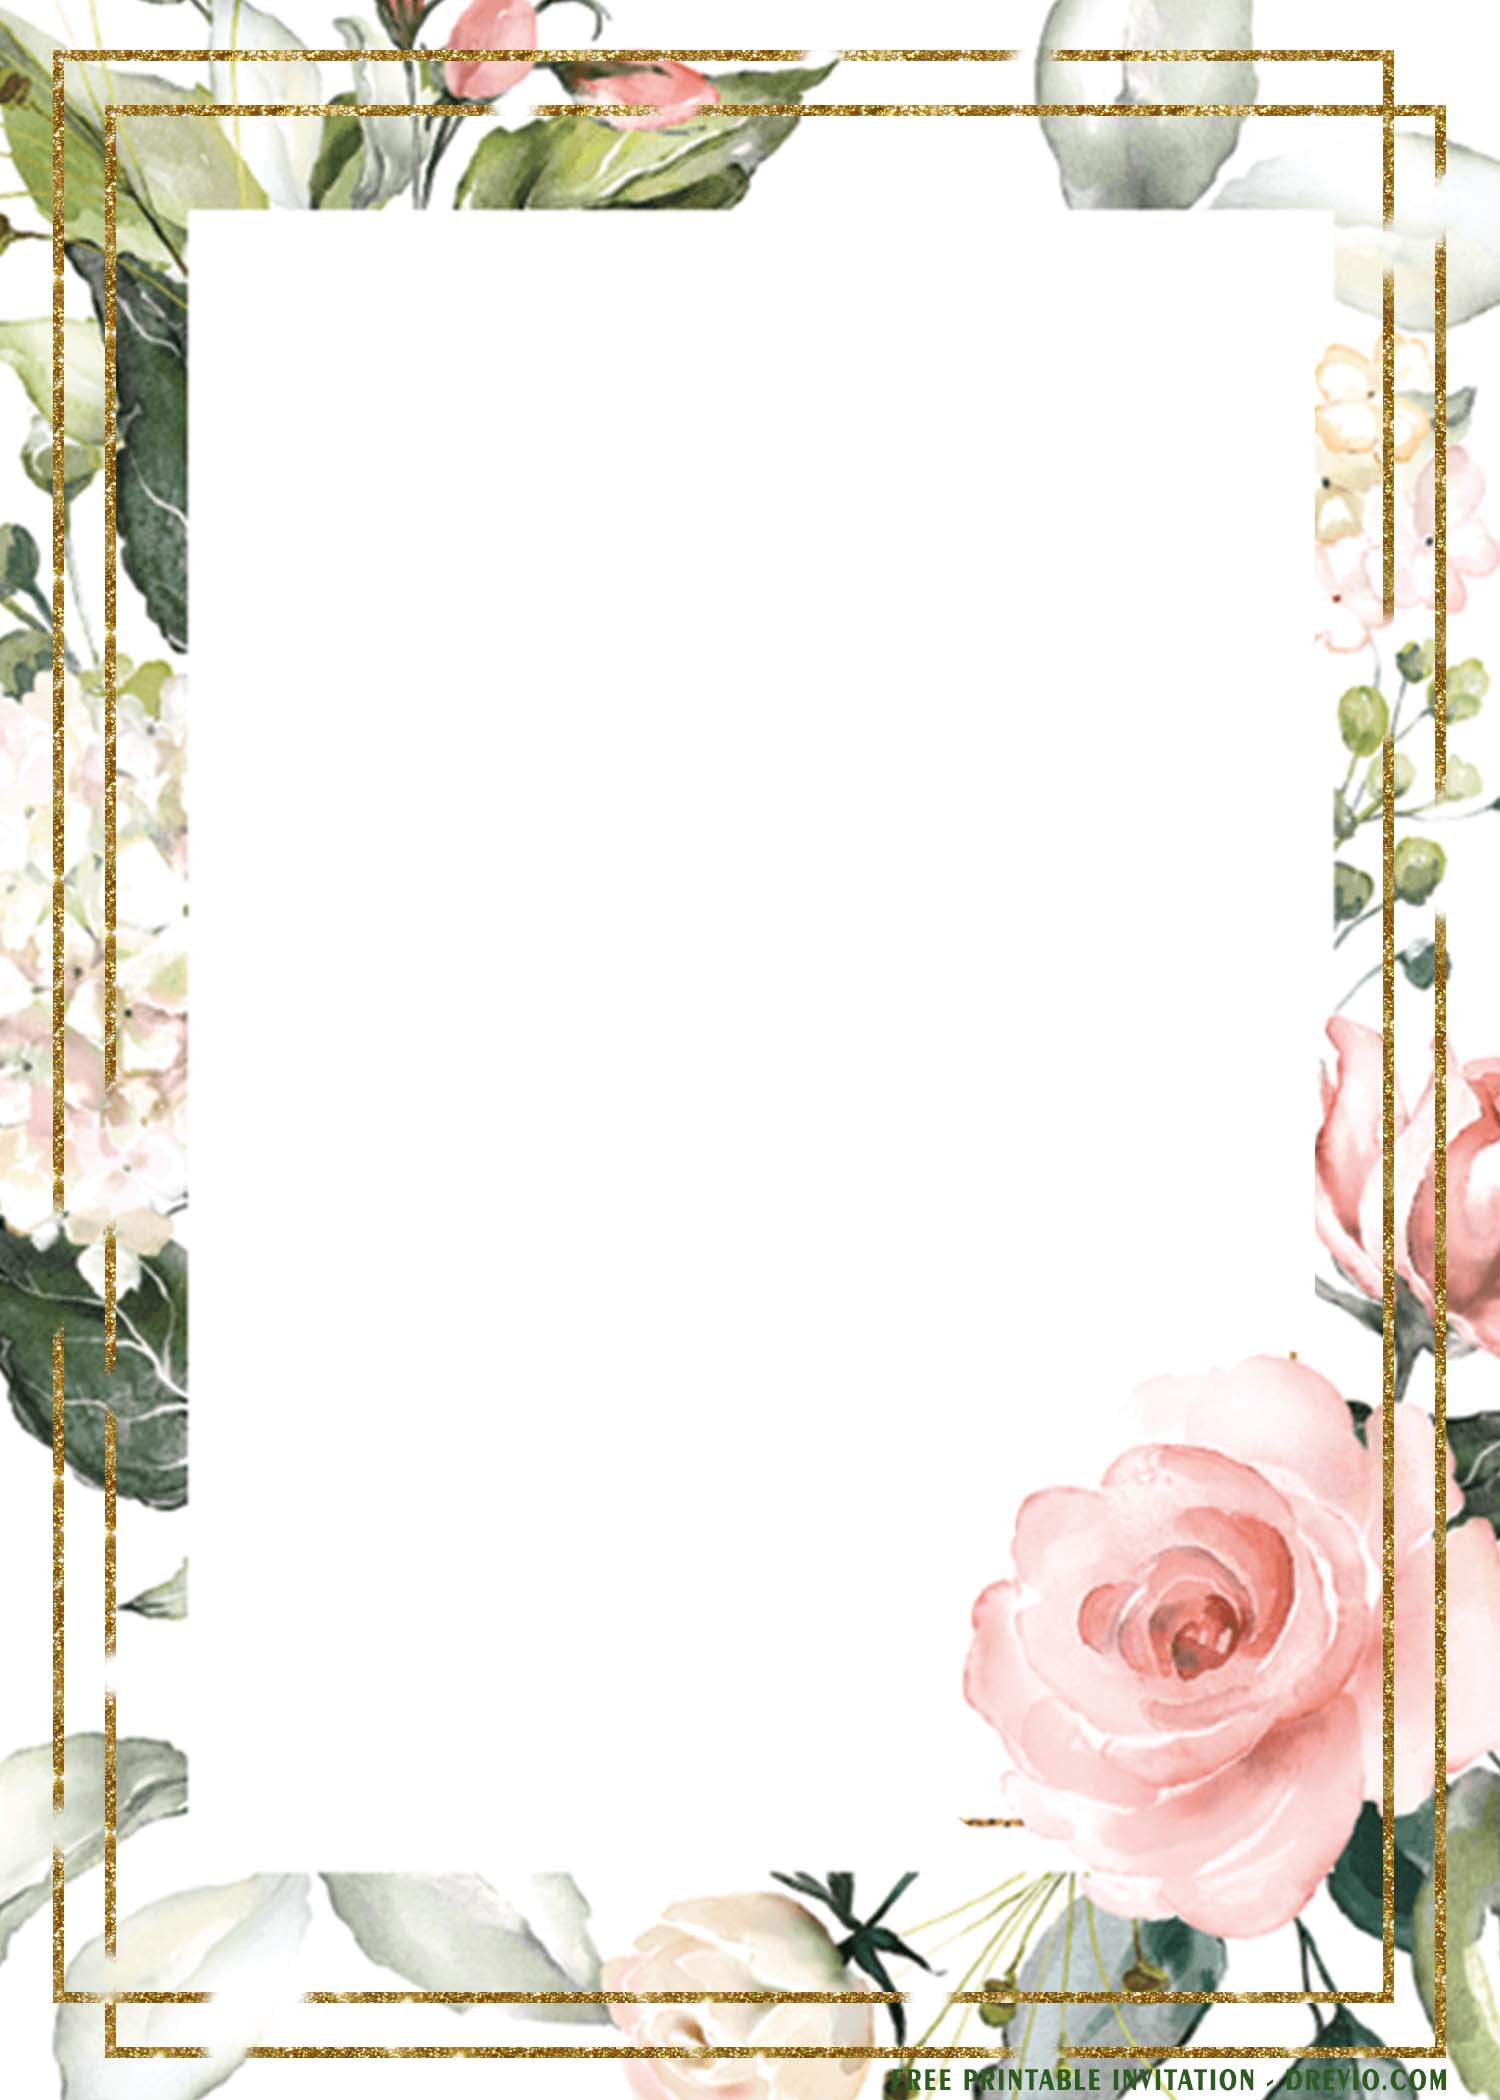 (FREE Printable) Floral Frame Invitation Templates for Any